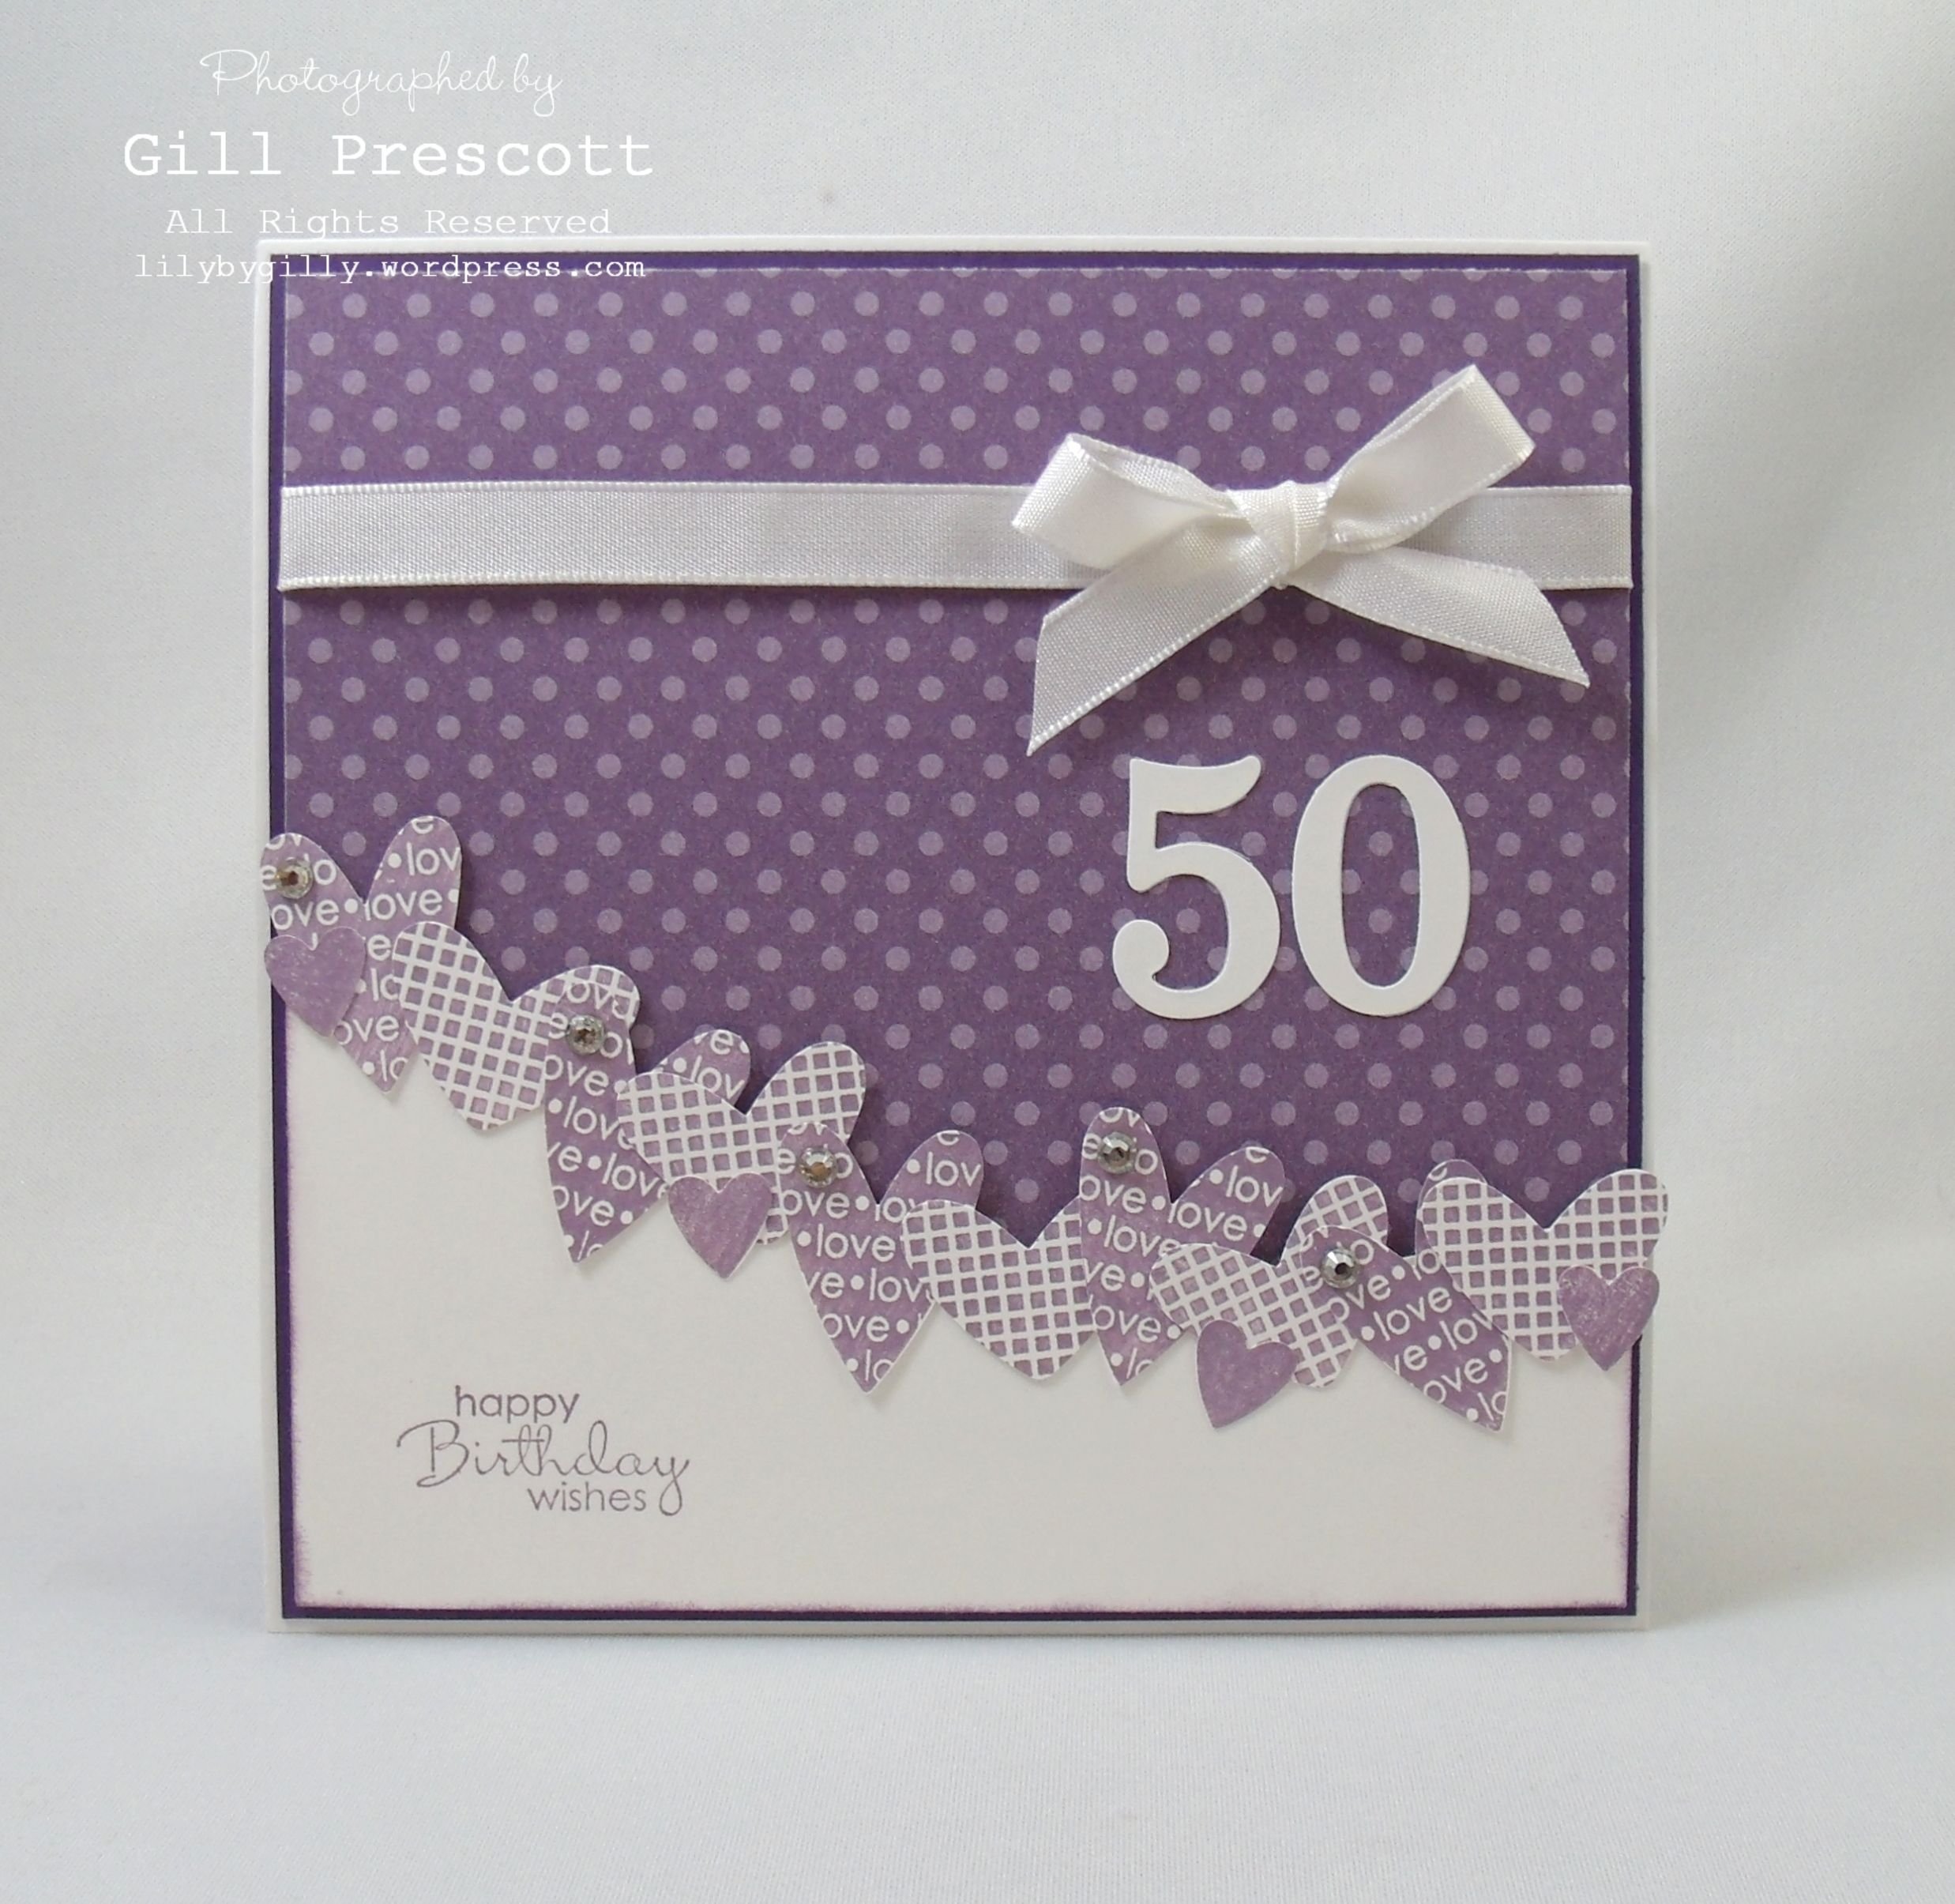 10 Trendy Stampin Up Birthday Card Ideas stampin up birthday wishes cards card ideas and birthdays 2022